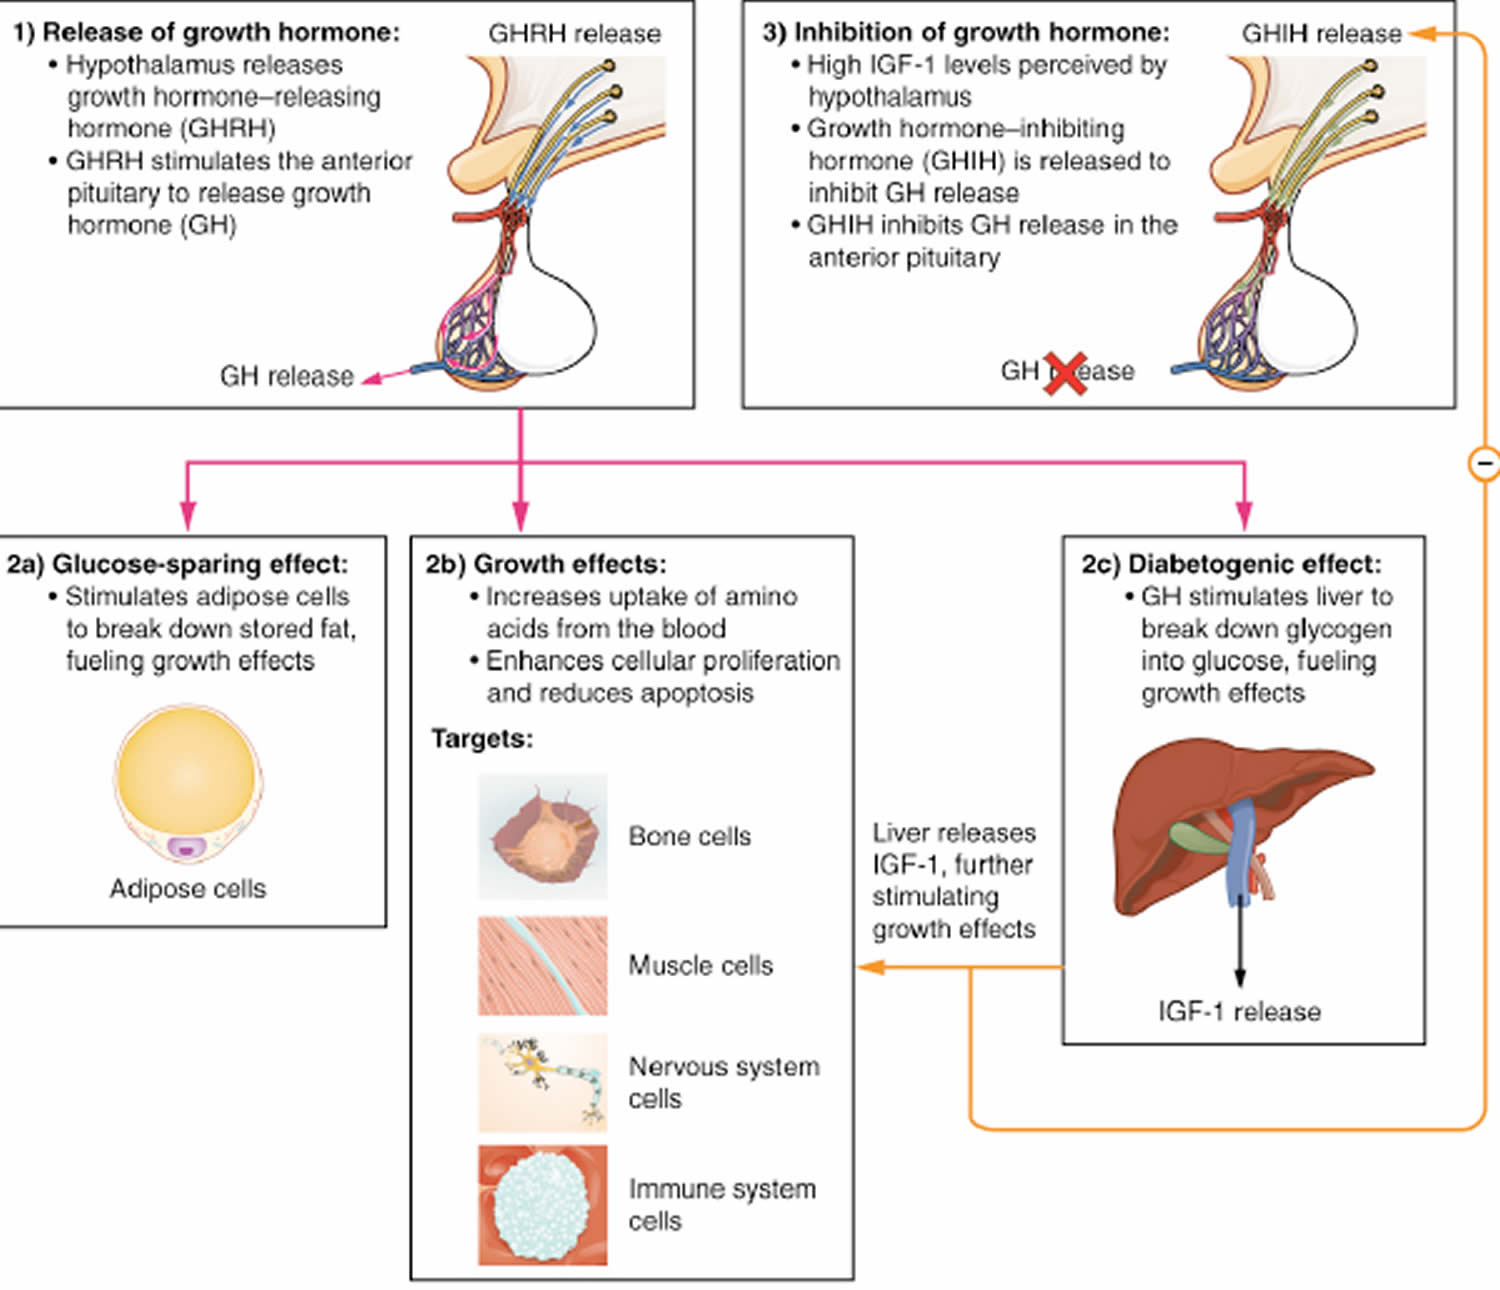 Summary of actions of growth hormone and IGF-1